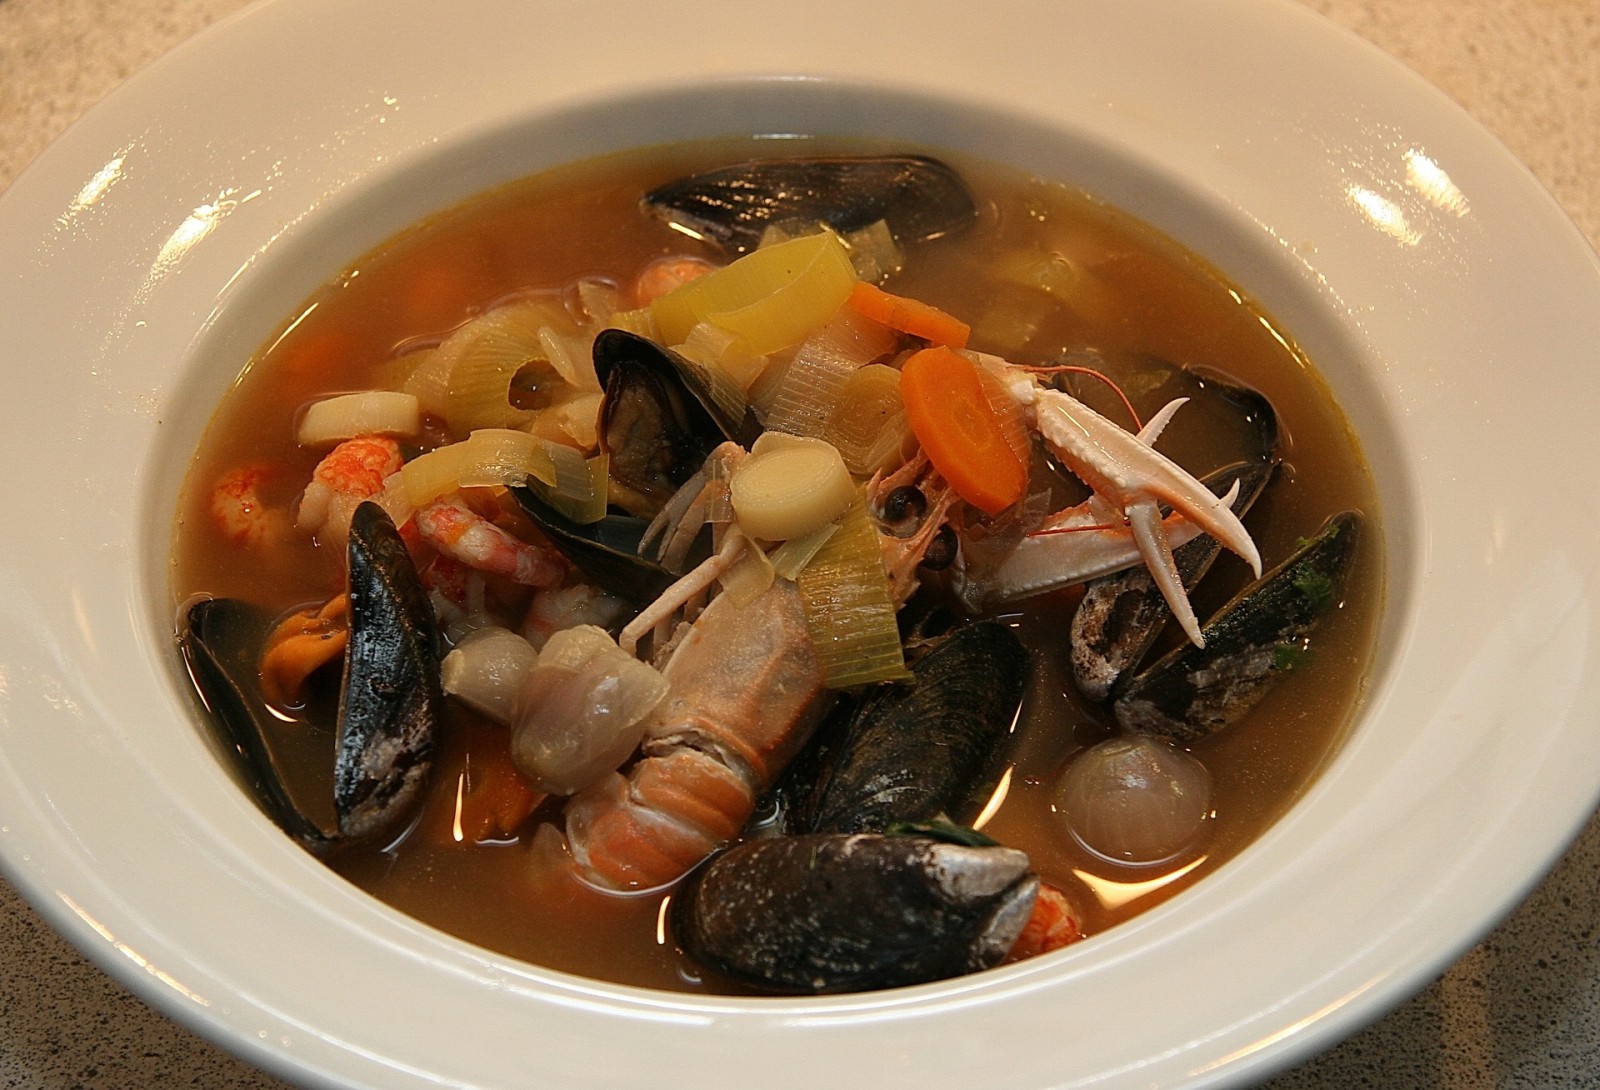 Wine pairings for fish soup